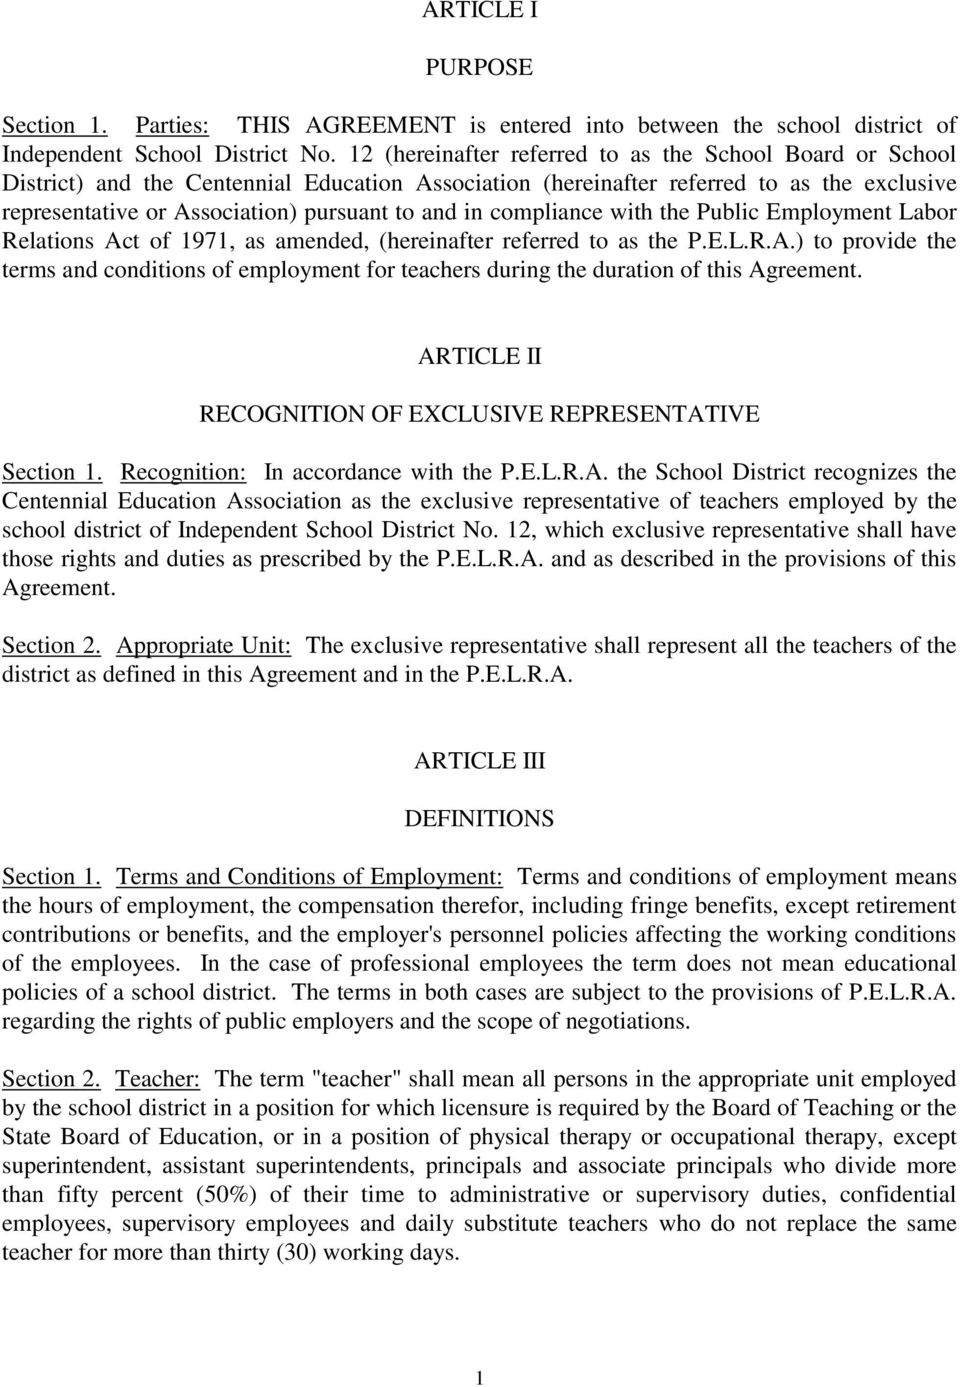 in compliance with the Public Employment Labor Relations Act of 1971, as amended, (hereinafter referred to as the P.E.L.R.A.) to provide the terms and conditions of employment for teachers during the duration of this Agreement.